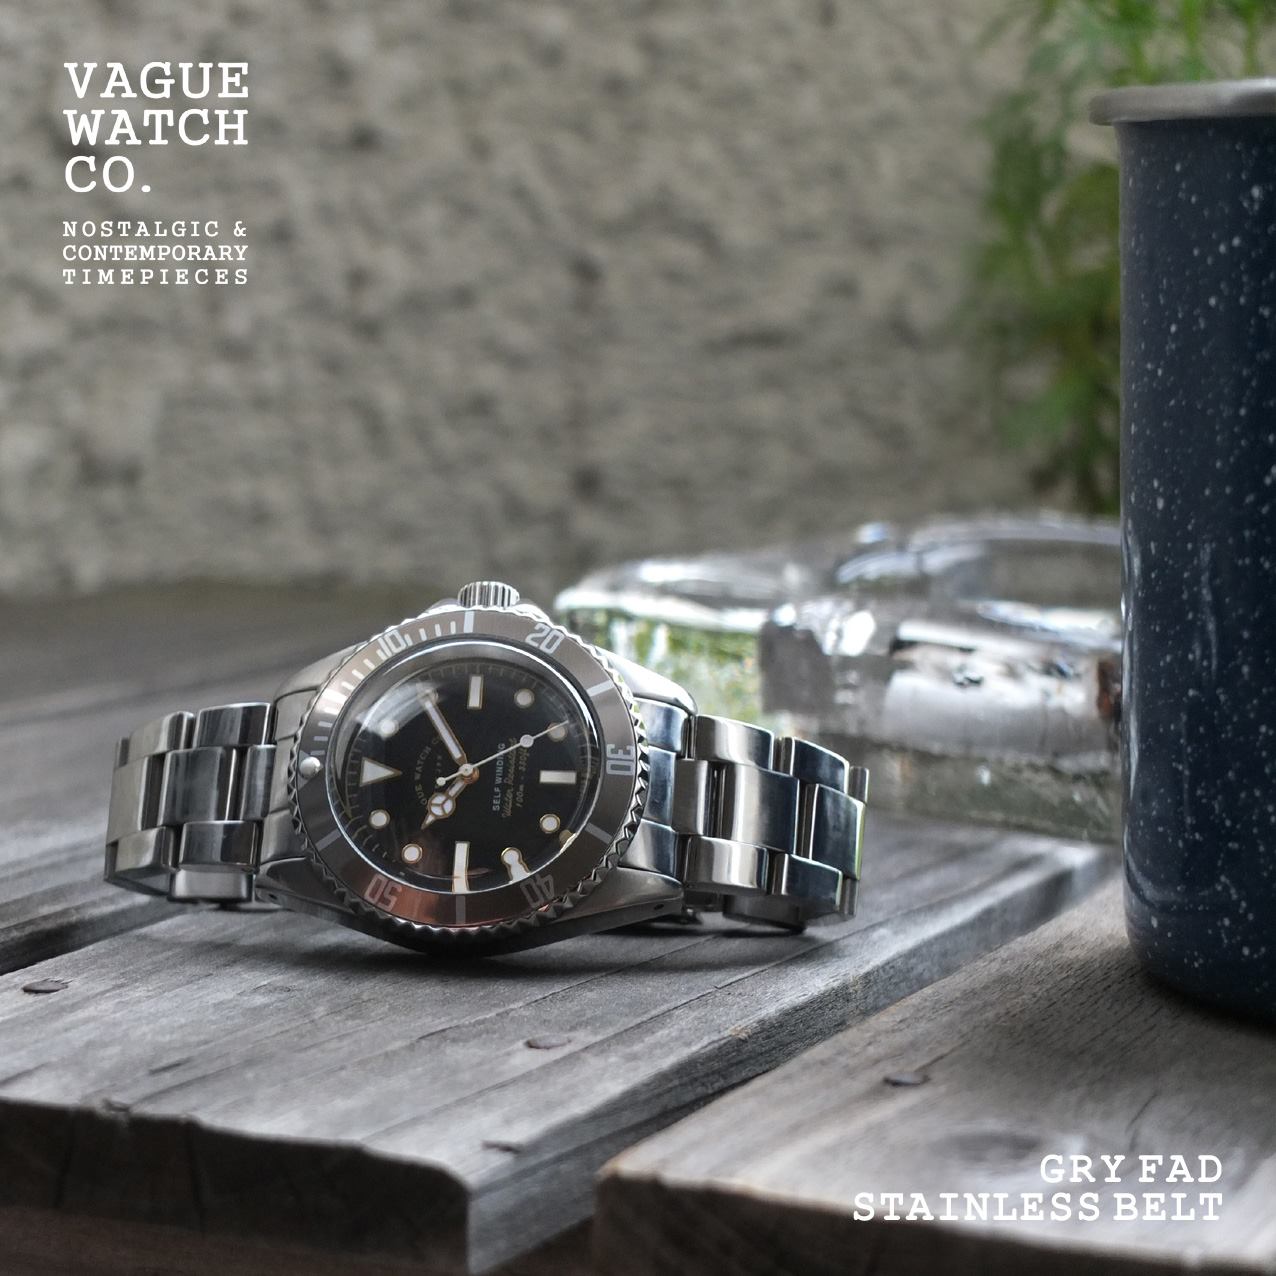 vague watch GRY FAD 40mm